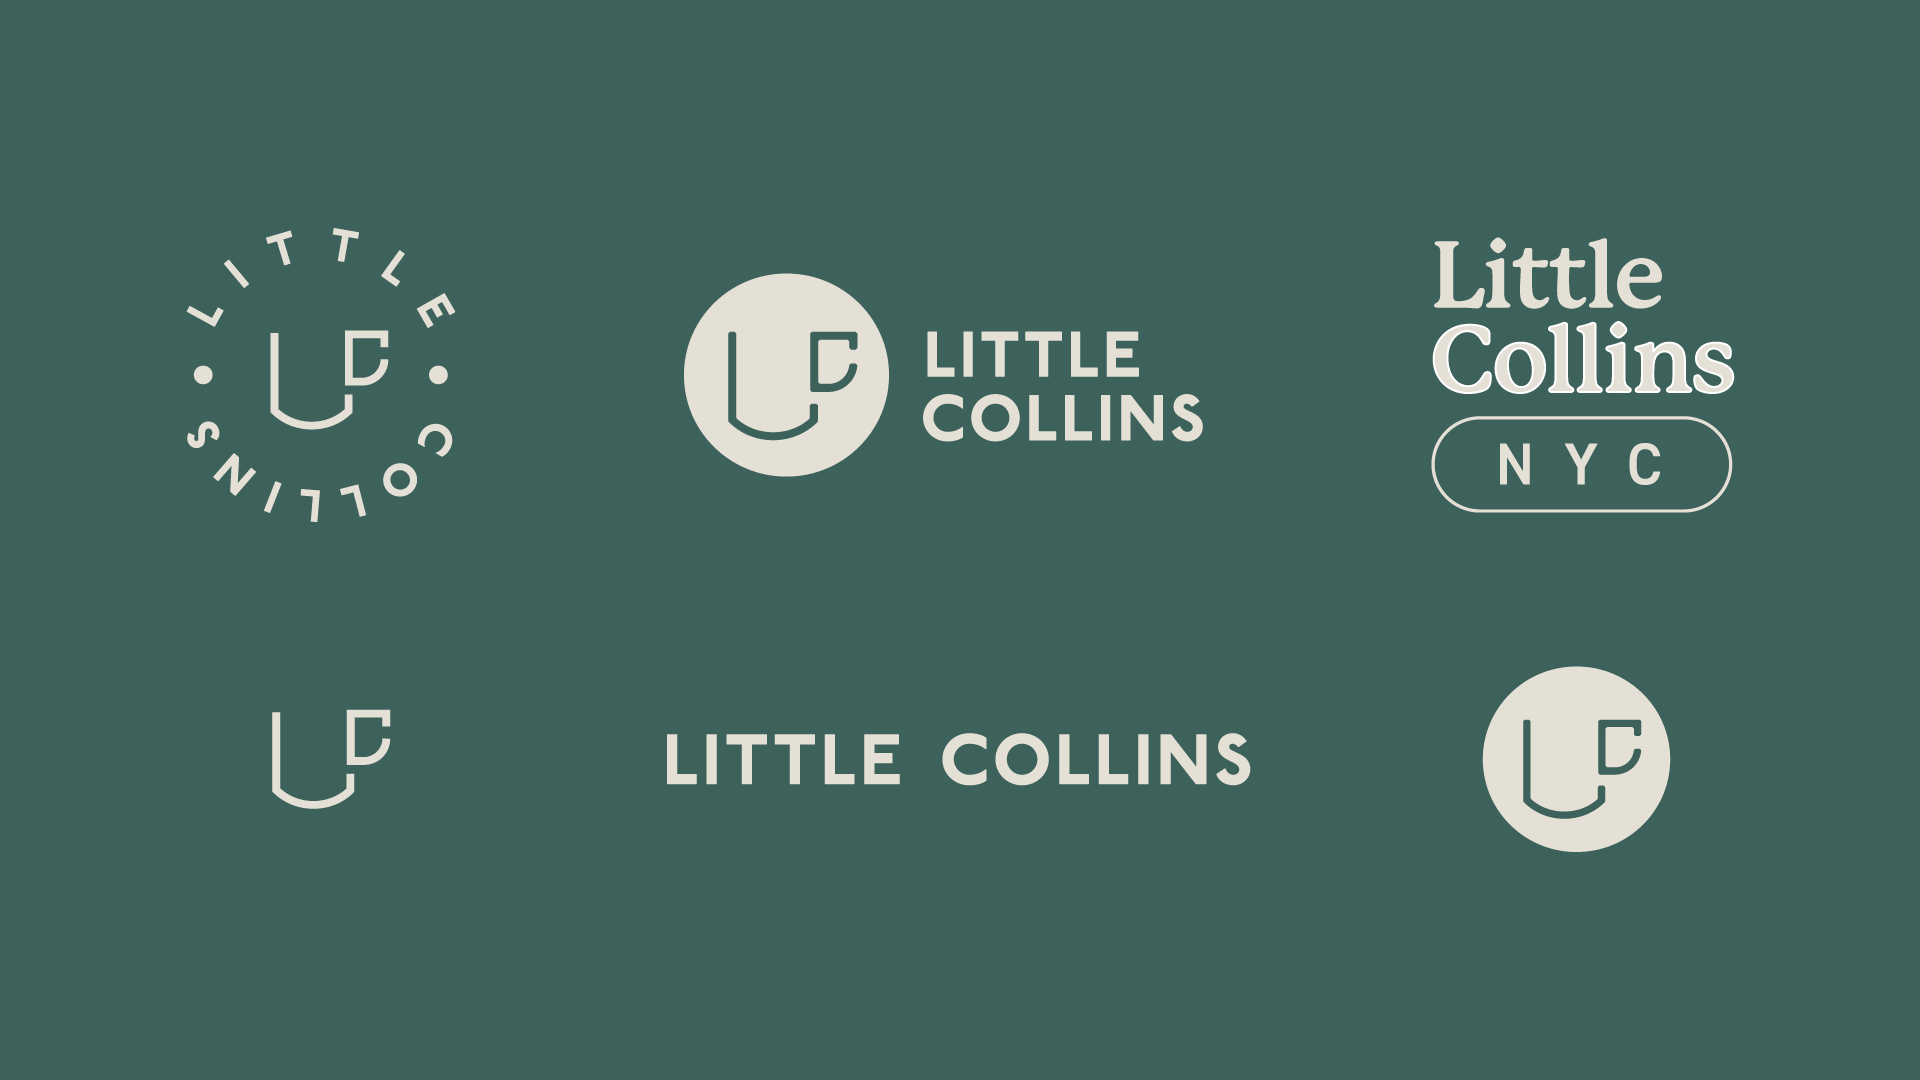 There are six variations of the Little Collins logo. All are in a parchment color against the avocado colored background.